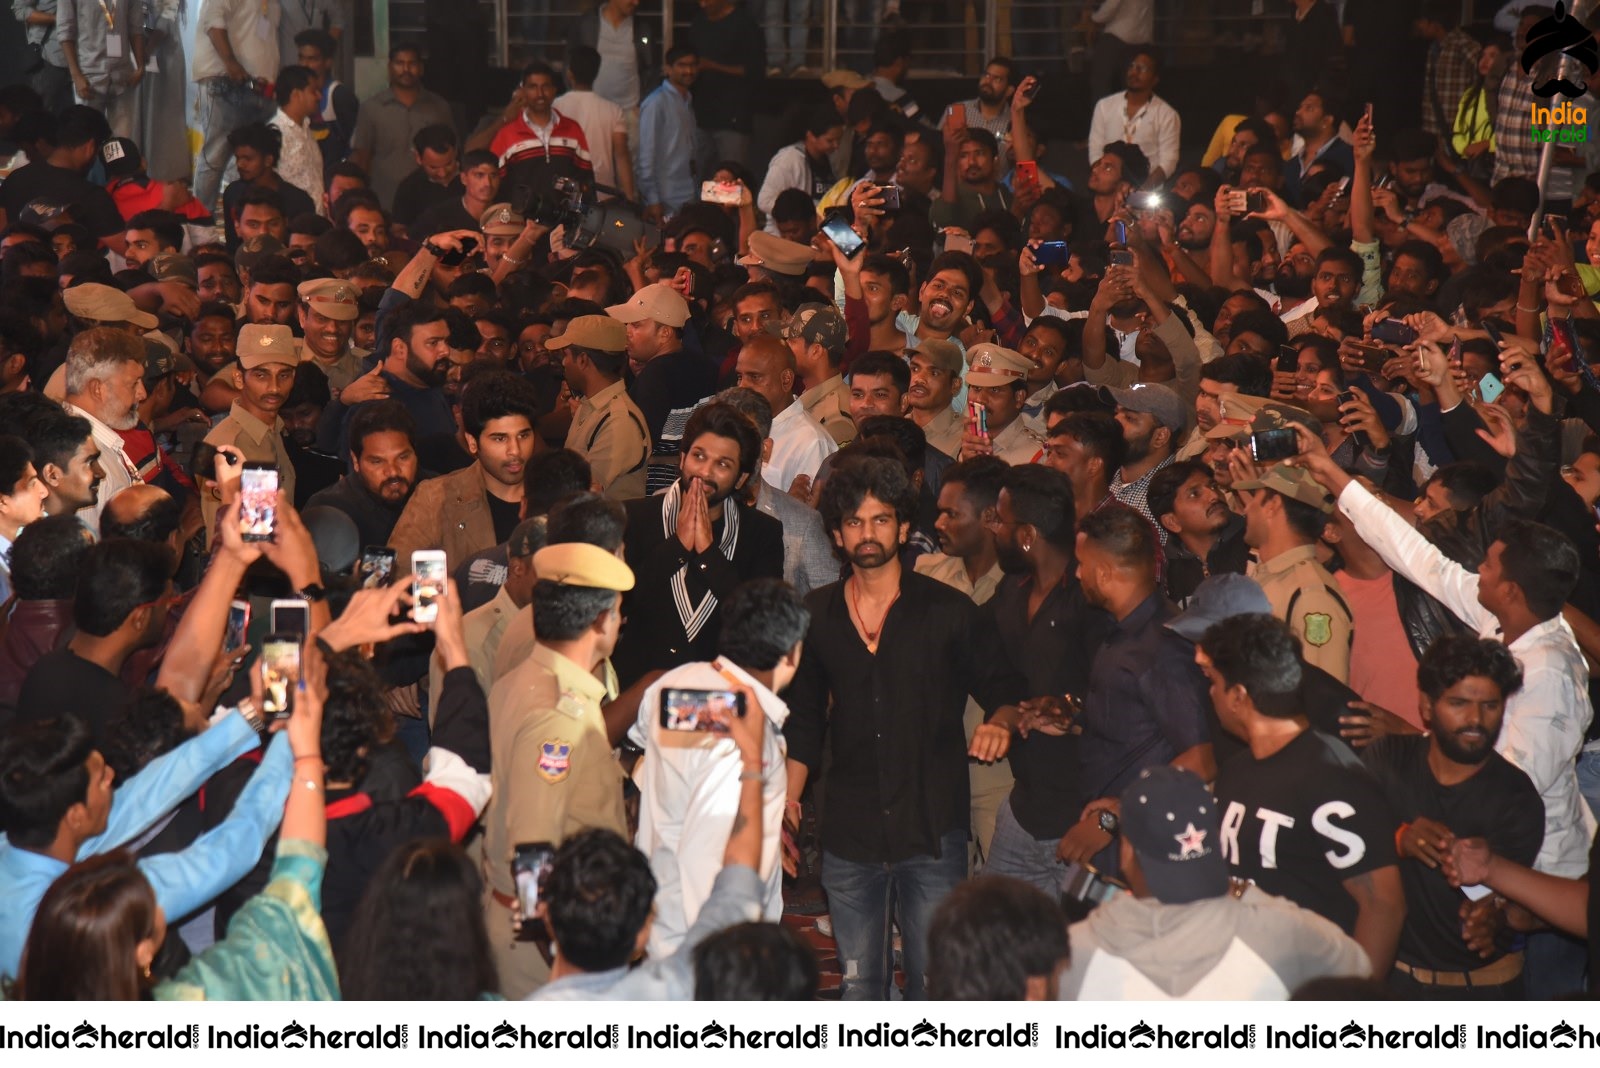 Actor Allu Arjun mobbed by Crowd during his Mass Entry Set 1